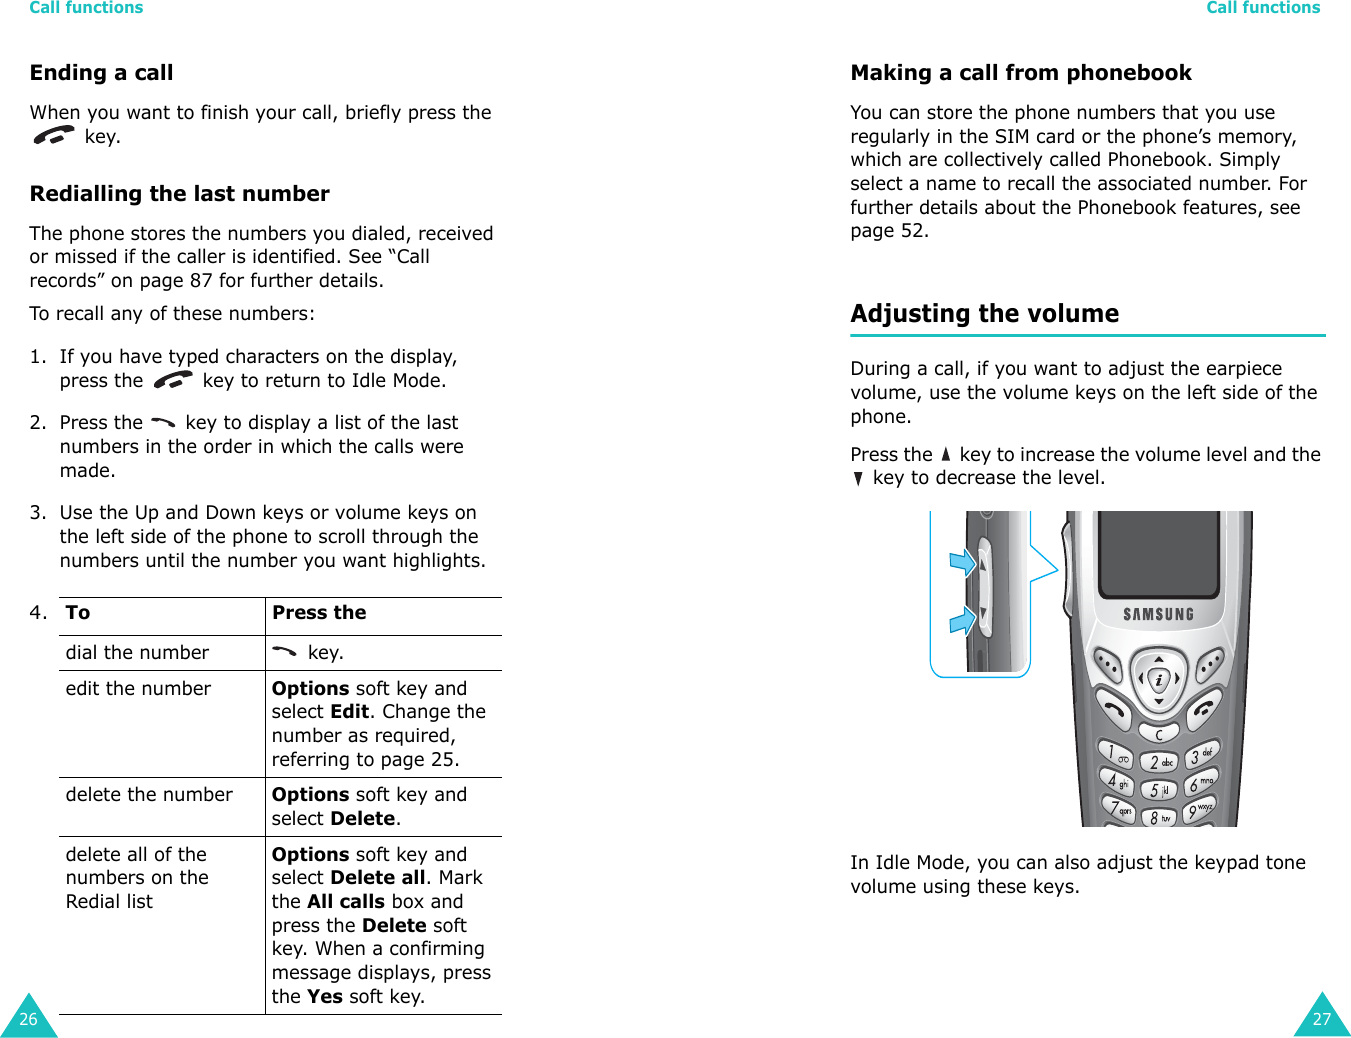 Call functions26Ending a callWhen you want to finish your call, briefly press the  key.Redialling the last numberThe phone stores the numbers you dialed, received or missed if the caller is identified. See “Call records” on page 87 for further details. To recall any of these numbers:1. If you have typed characters on the display, press the   key to return to Idle Mode.2. Press the   key to display a list of the last numbers in the order in which the calls were made.3. Use the Up and Down keys or volume keys on the left side of the phone to scroll through the numbers until the number you want highlights.4.   ToPress thedial the number   key.edit the number Options soft key and select Edit. Change the number as required, referring to page 25.delete the number Options soft key and select Delete.delete all of the numbers on the Redial list Options soft key and select Delete all. Mark the All calls box and press the Delete soft key. When a confirming message displays, press the Yes soft key.Call functions27Making a call from phonebookYou can store the phone numbers that you use regularly in the SIM card or the phone’s memory, which are collectively called Phonebook. Simply select a name to recall the associated number. For further details about the Phonebook features, see page 52.Adjusting the volumeDuring a call, if you want to adjust the earpiece volume, use the volume keys on the left side of the phone. Press the   key to increase the volume level and the  key to decrease the level.In Idle Mode, you can also adjust the keypad tone volume using these keys.